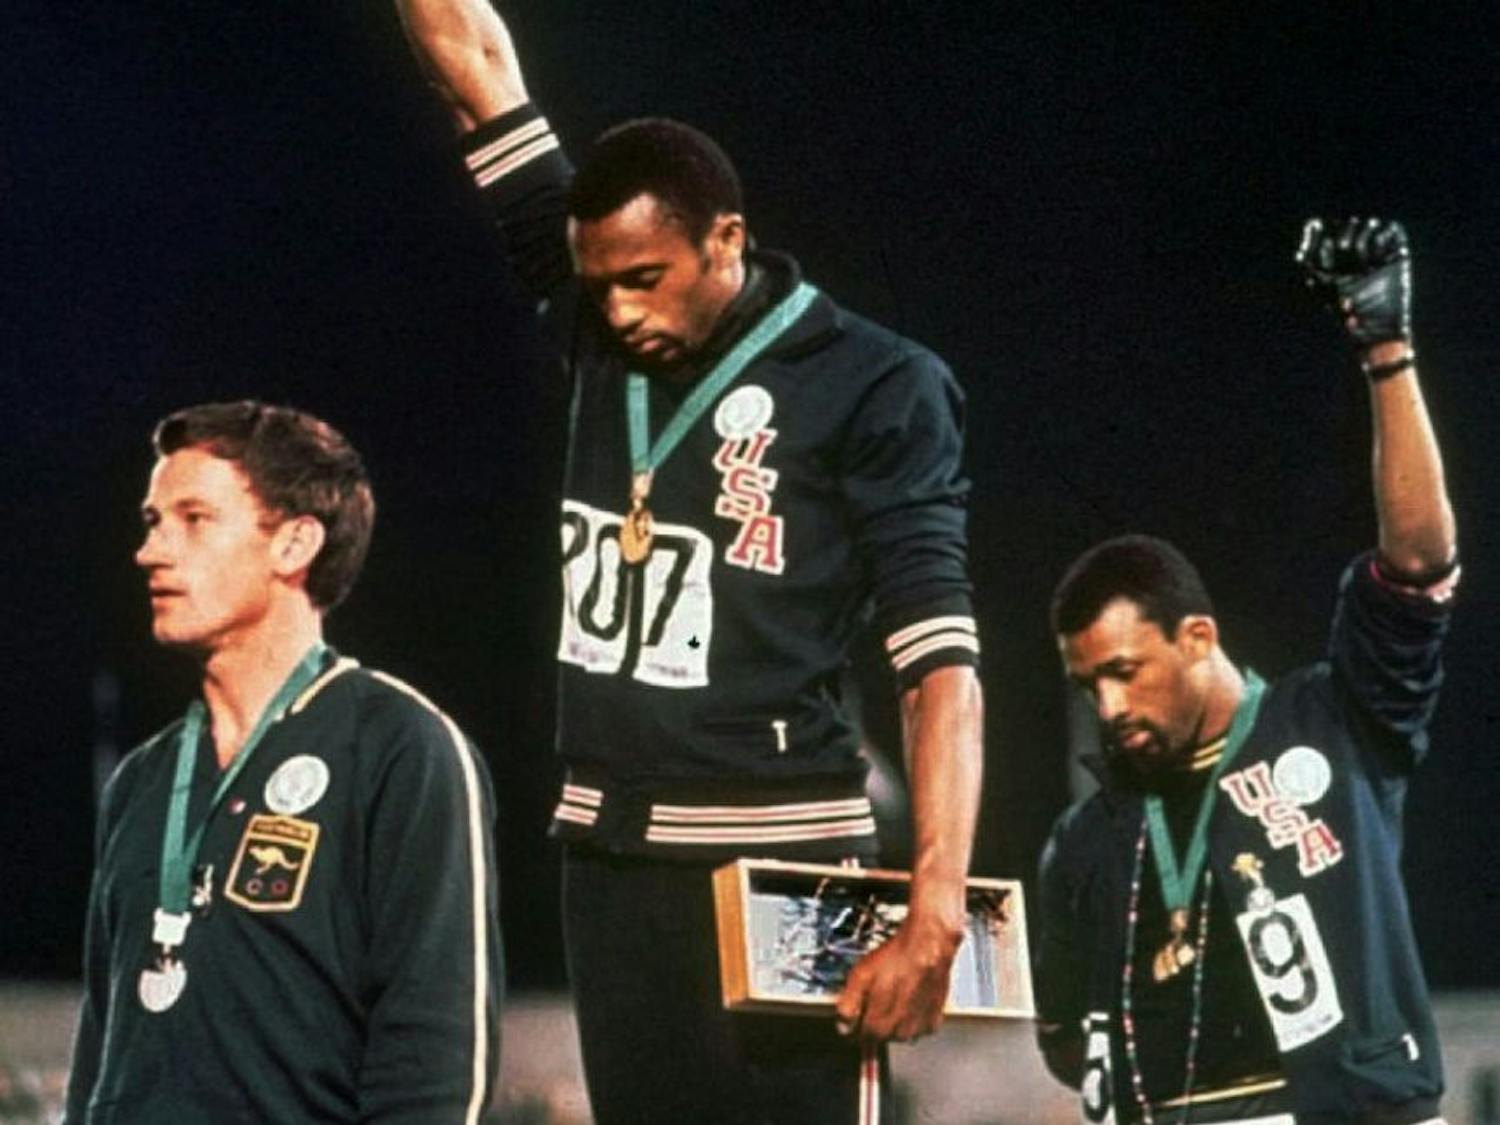 Americans Tommie Smith (center) and John Carlos (right) raised their fists after the 1968 Olympics 200-meter race as "The Star-Spangled Banner" played.&nbsp;